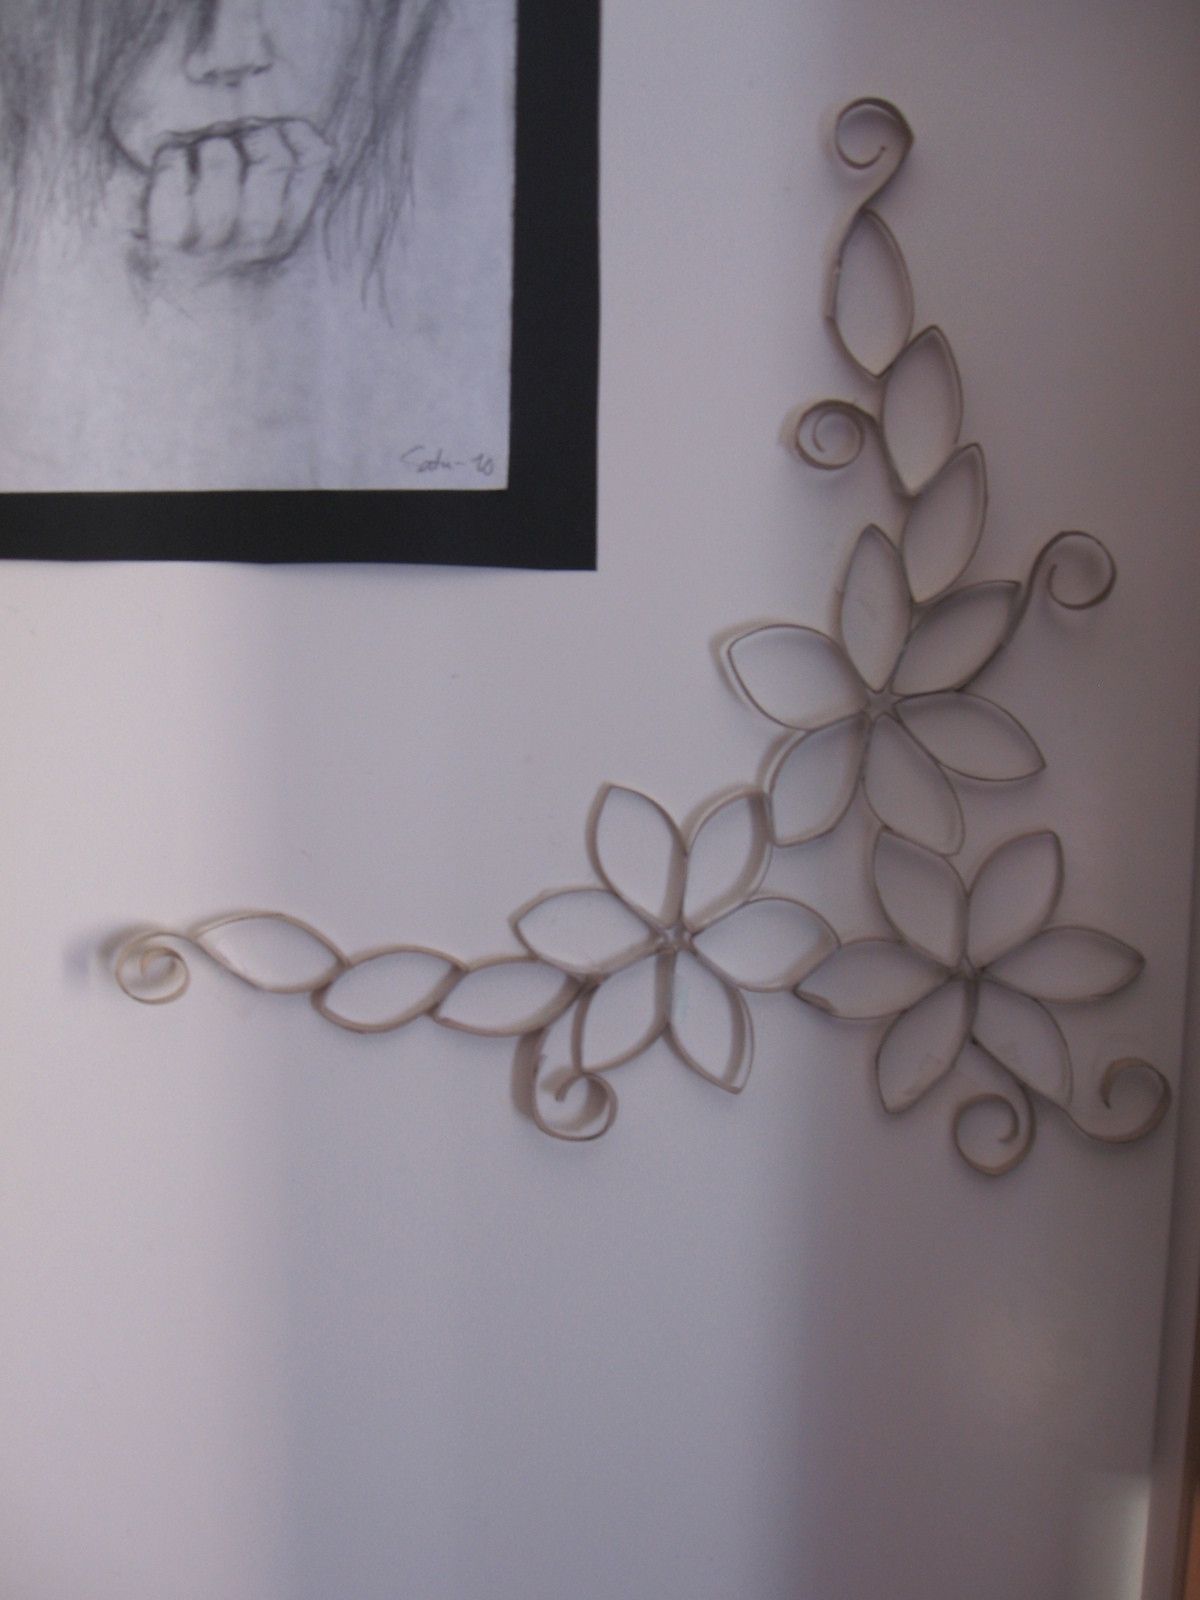 Toilet Paper Roll Wall Art · A Paper Roll Model · No Sew On Cut Out Throughout Toilet Paper Roll Wall Art (View 10 of 20)